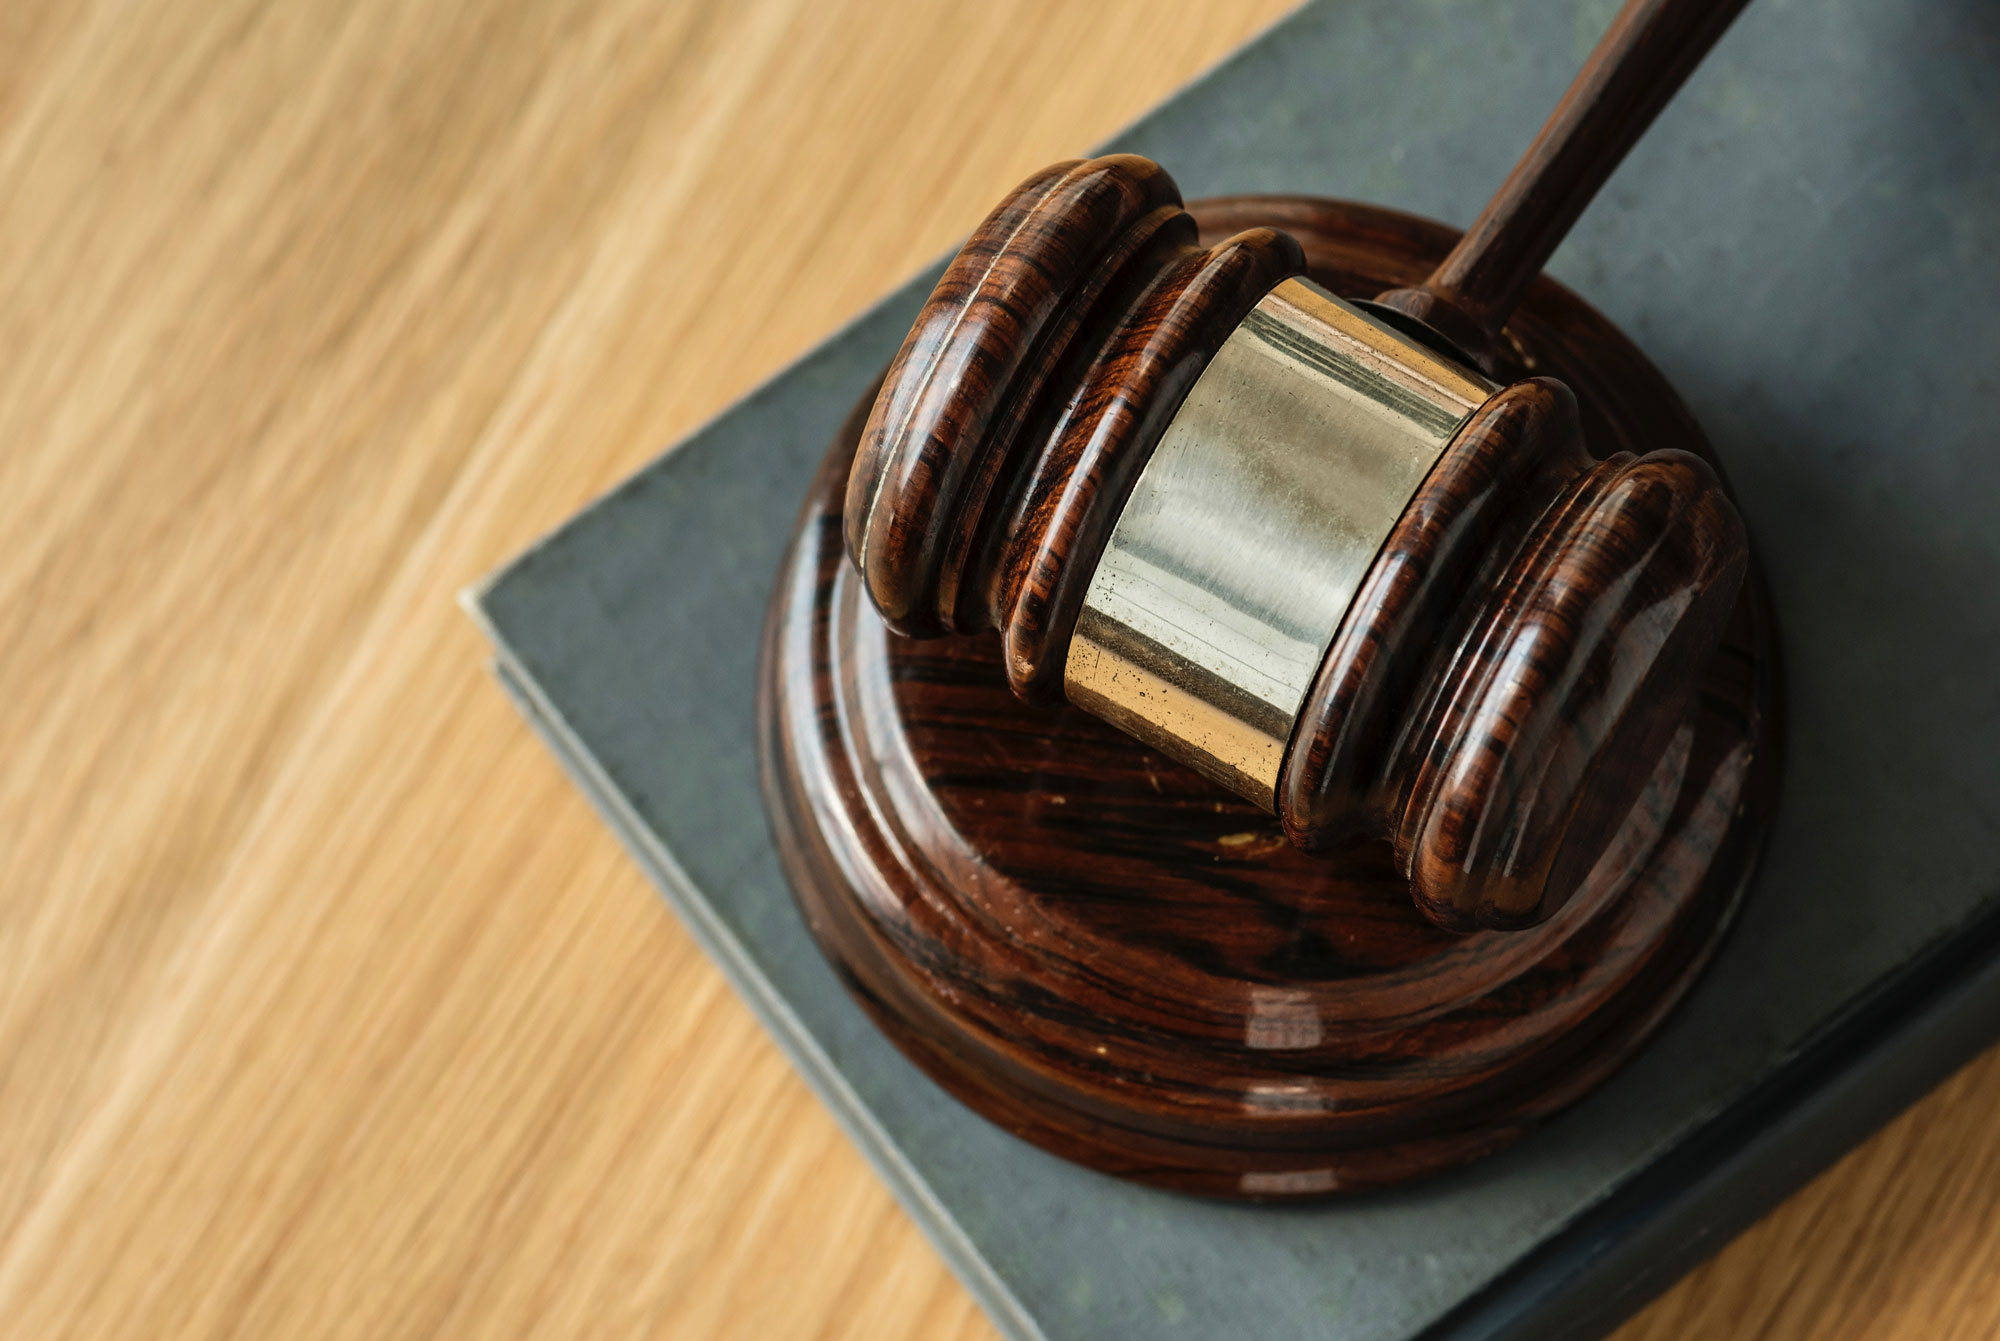 A close-up image of a dark wooden gavel resting on a block placed on a book. The gavel has a polished, smooth texture and metal band around its head. The background features a wooden surface, providing contrast to the gavel's darker wood—emblematic of personal injury attorneys' commitment to justice.